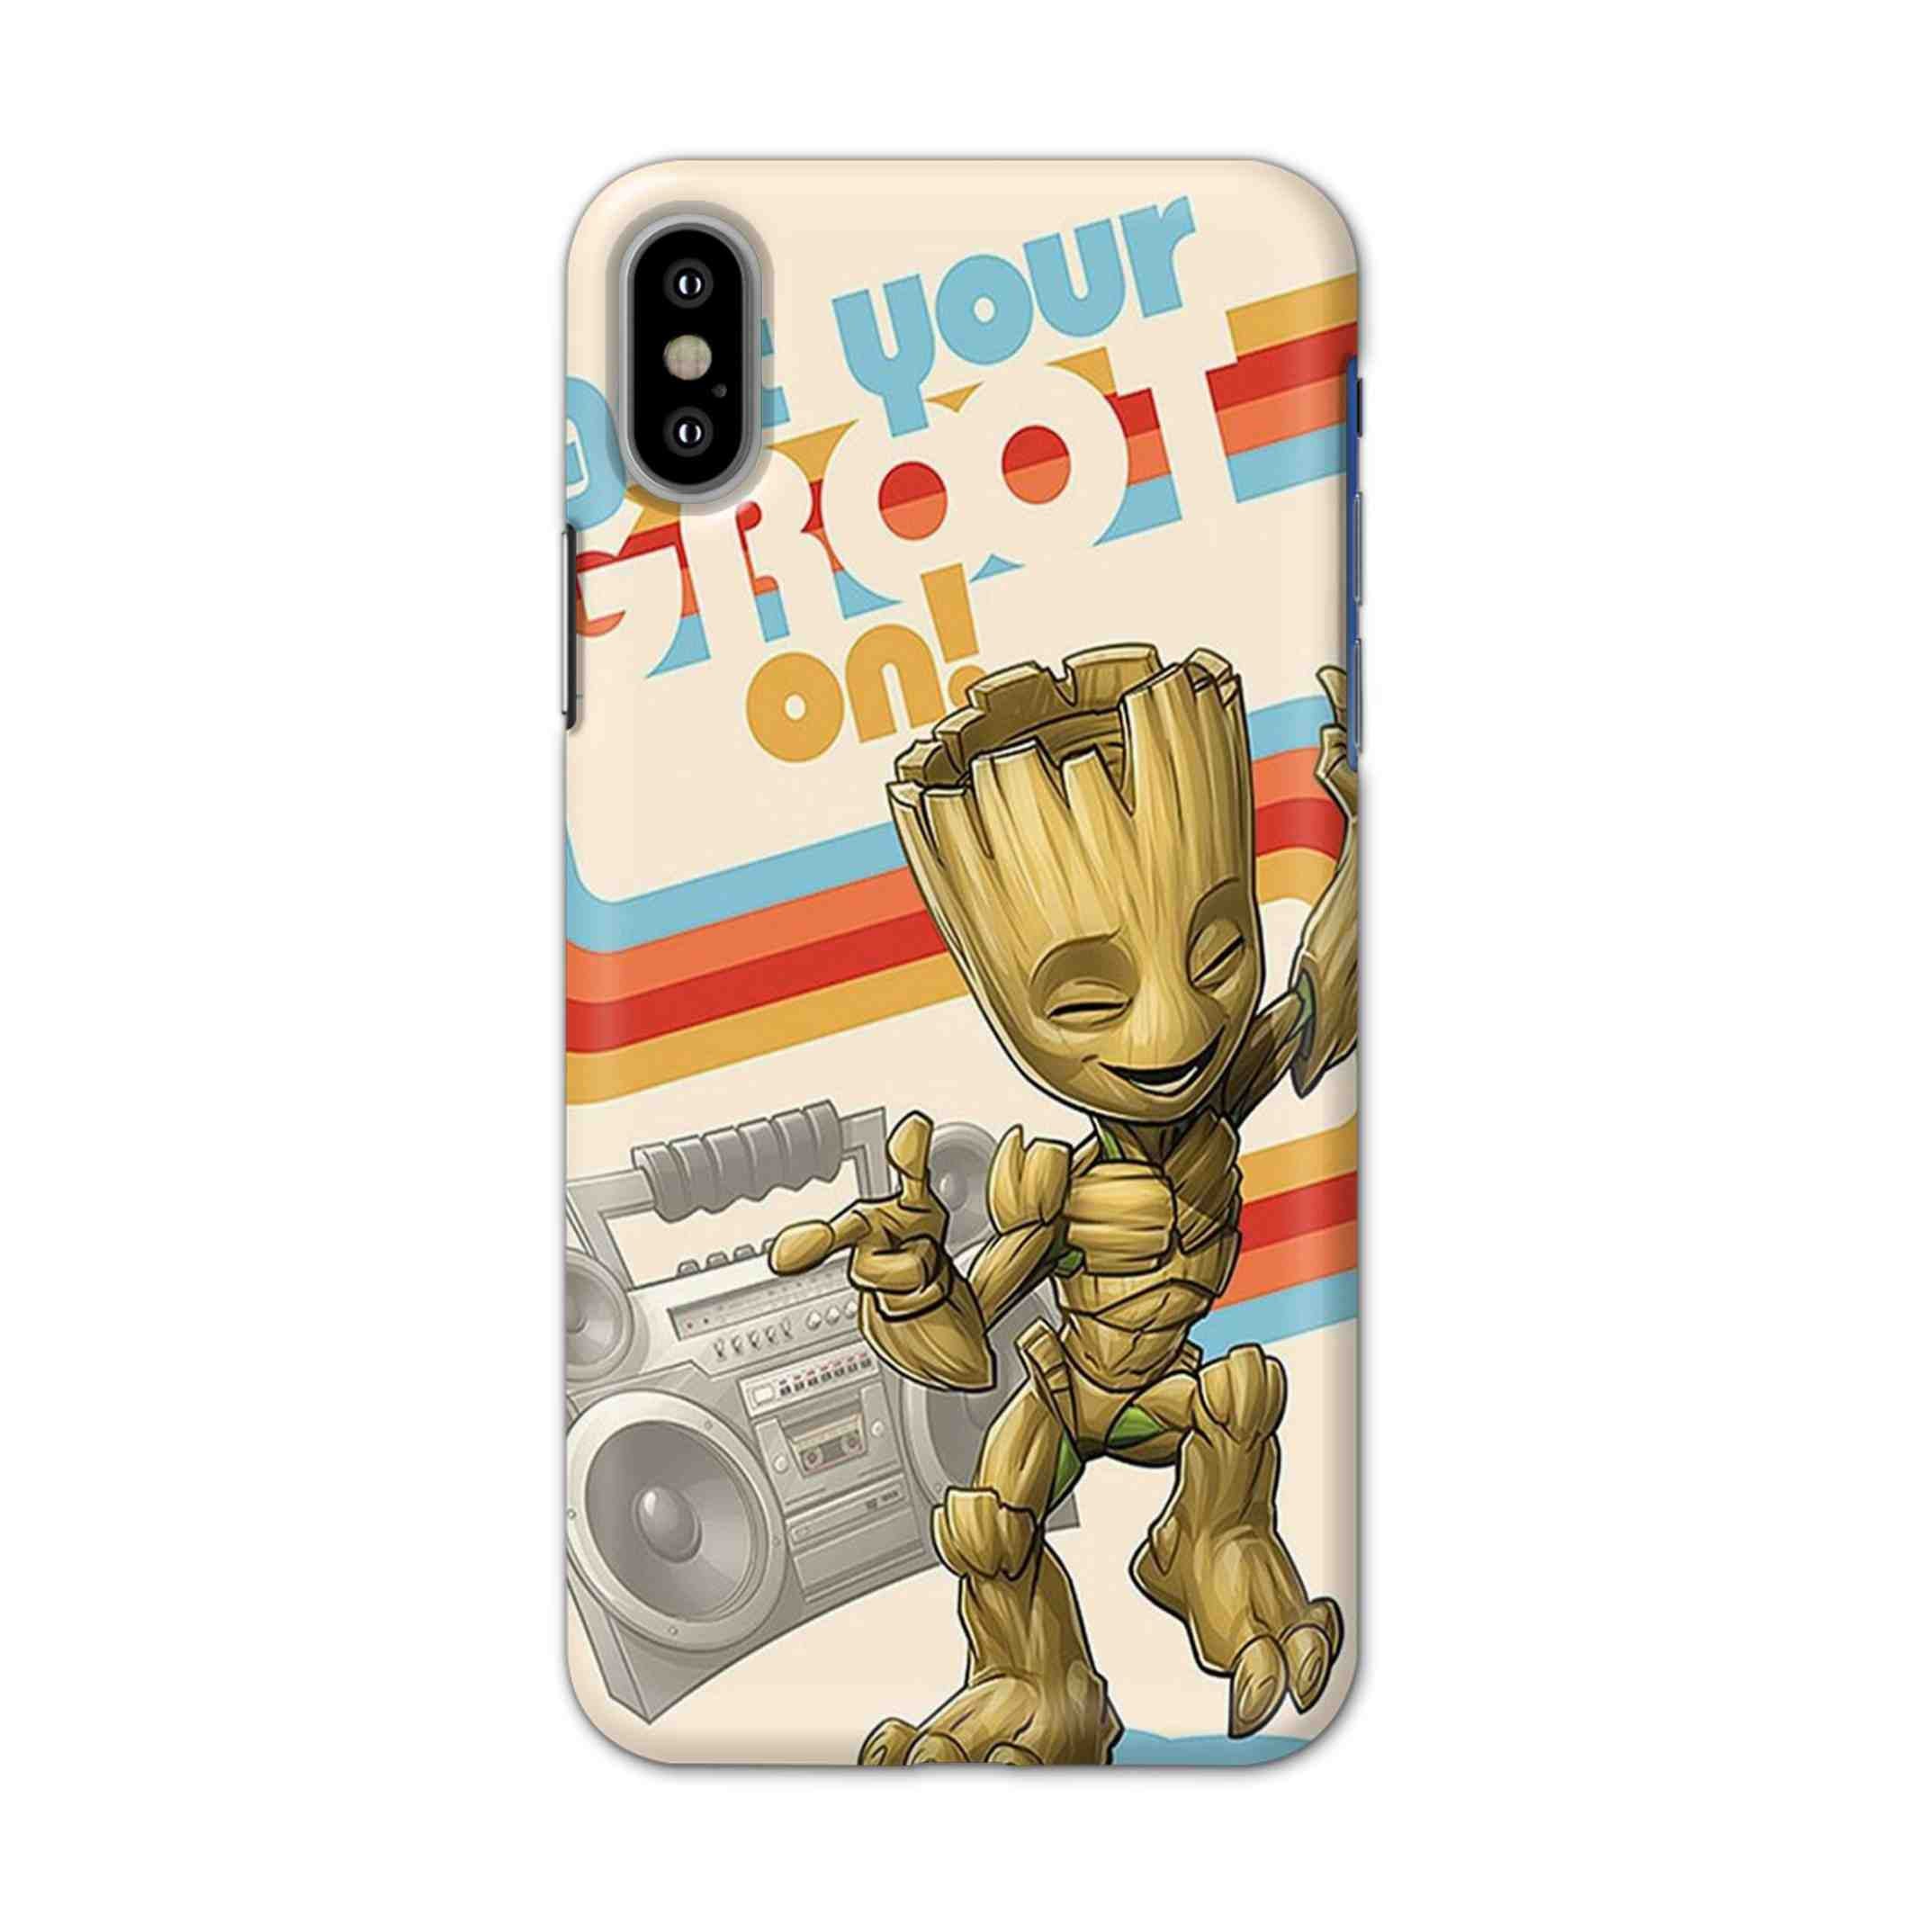 Buy Groot Hard Back Mobile Phone Case/Cover For iPhone X Online